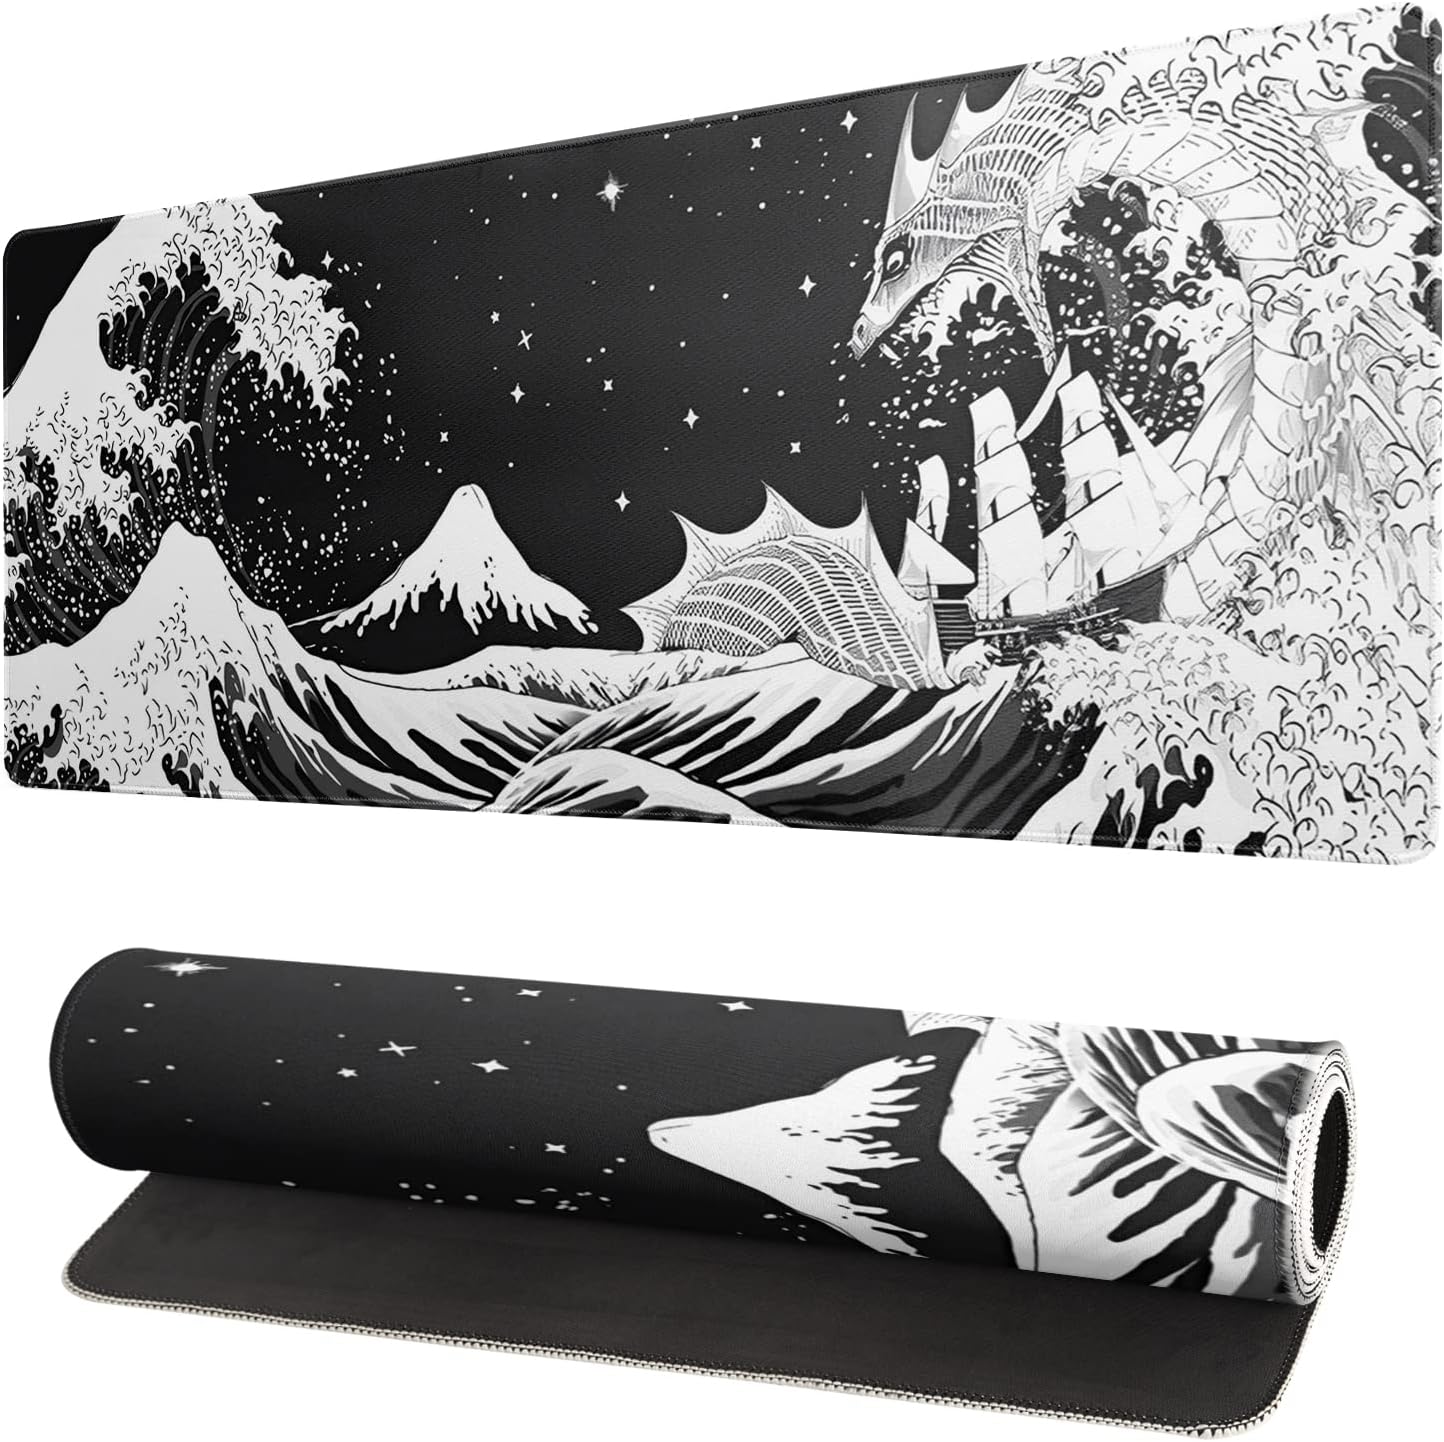 Black and White Japanese Wave Dragon Gaming Mouse Pad - Abstract Mat with Non-Slip Rubber Base, 31.5x11.8 Inch, Stitched Edges - Desk Pad for Office and Home